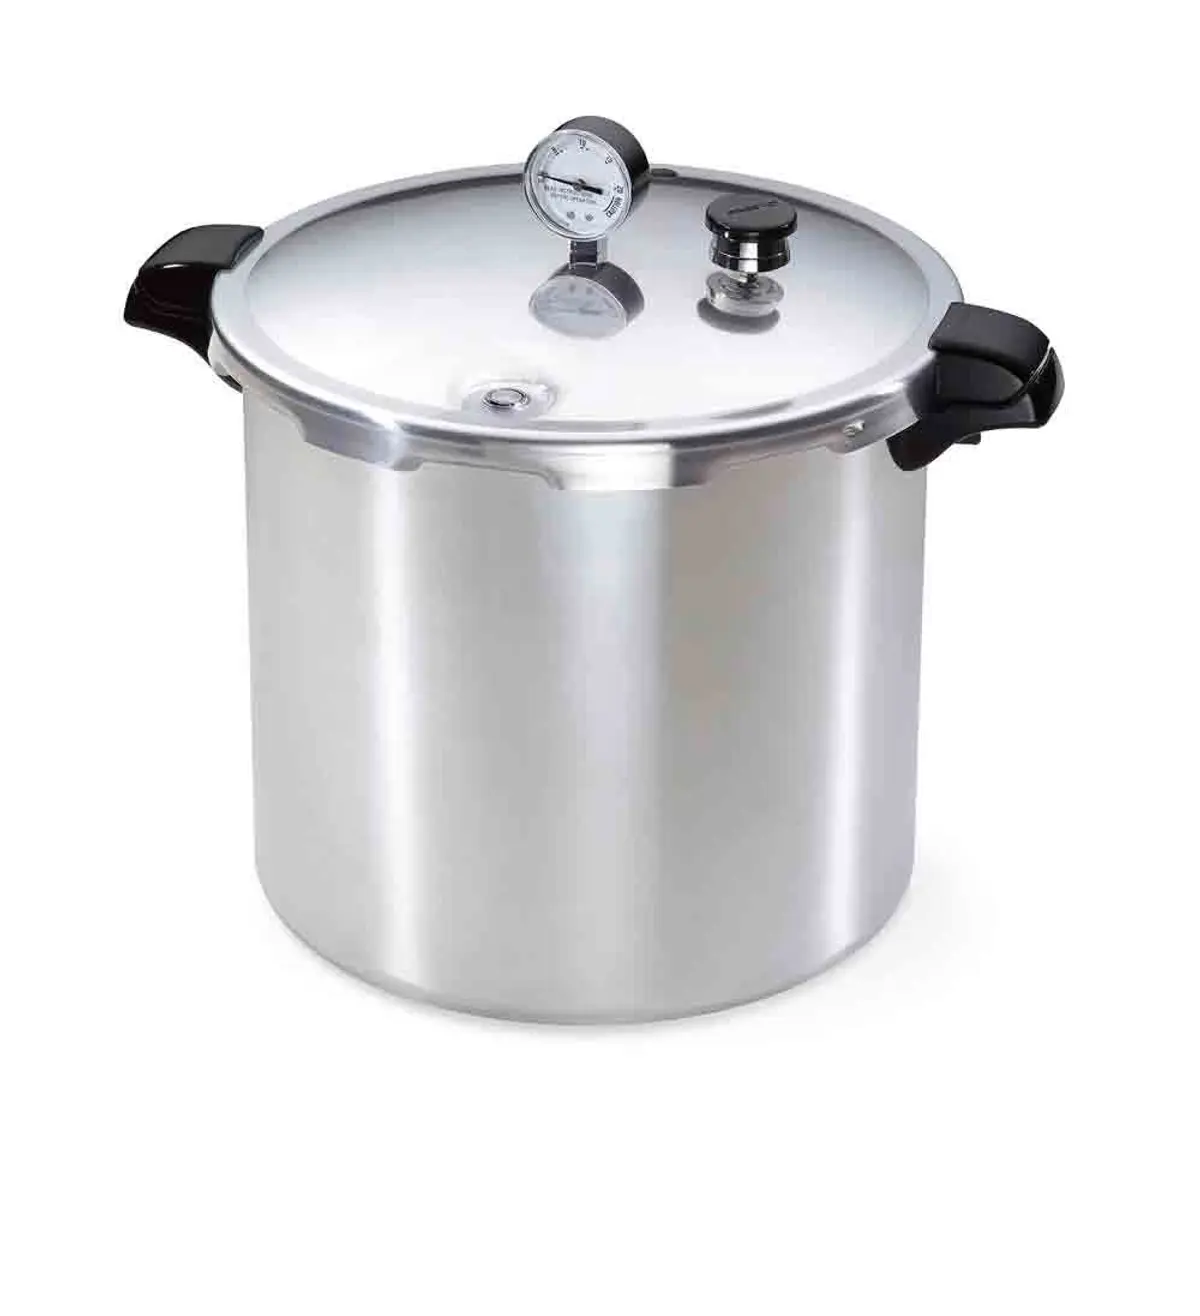 Presto 01781 Pressure Cooker for Canning review